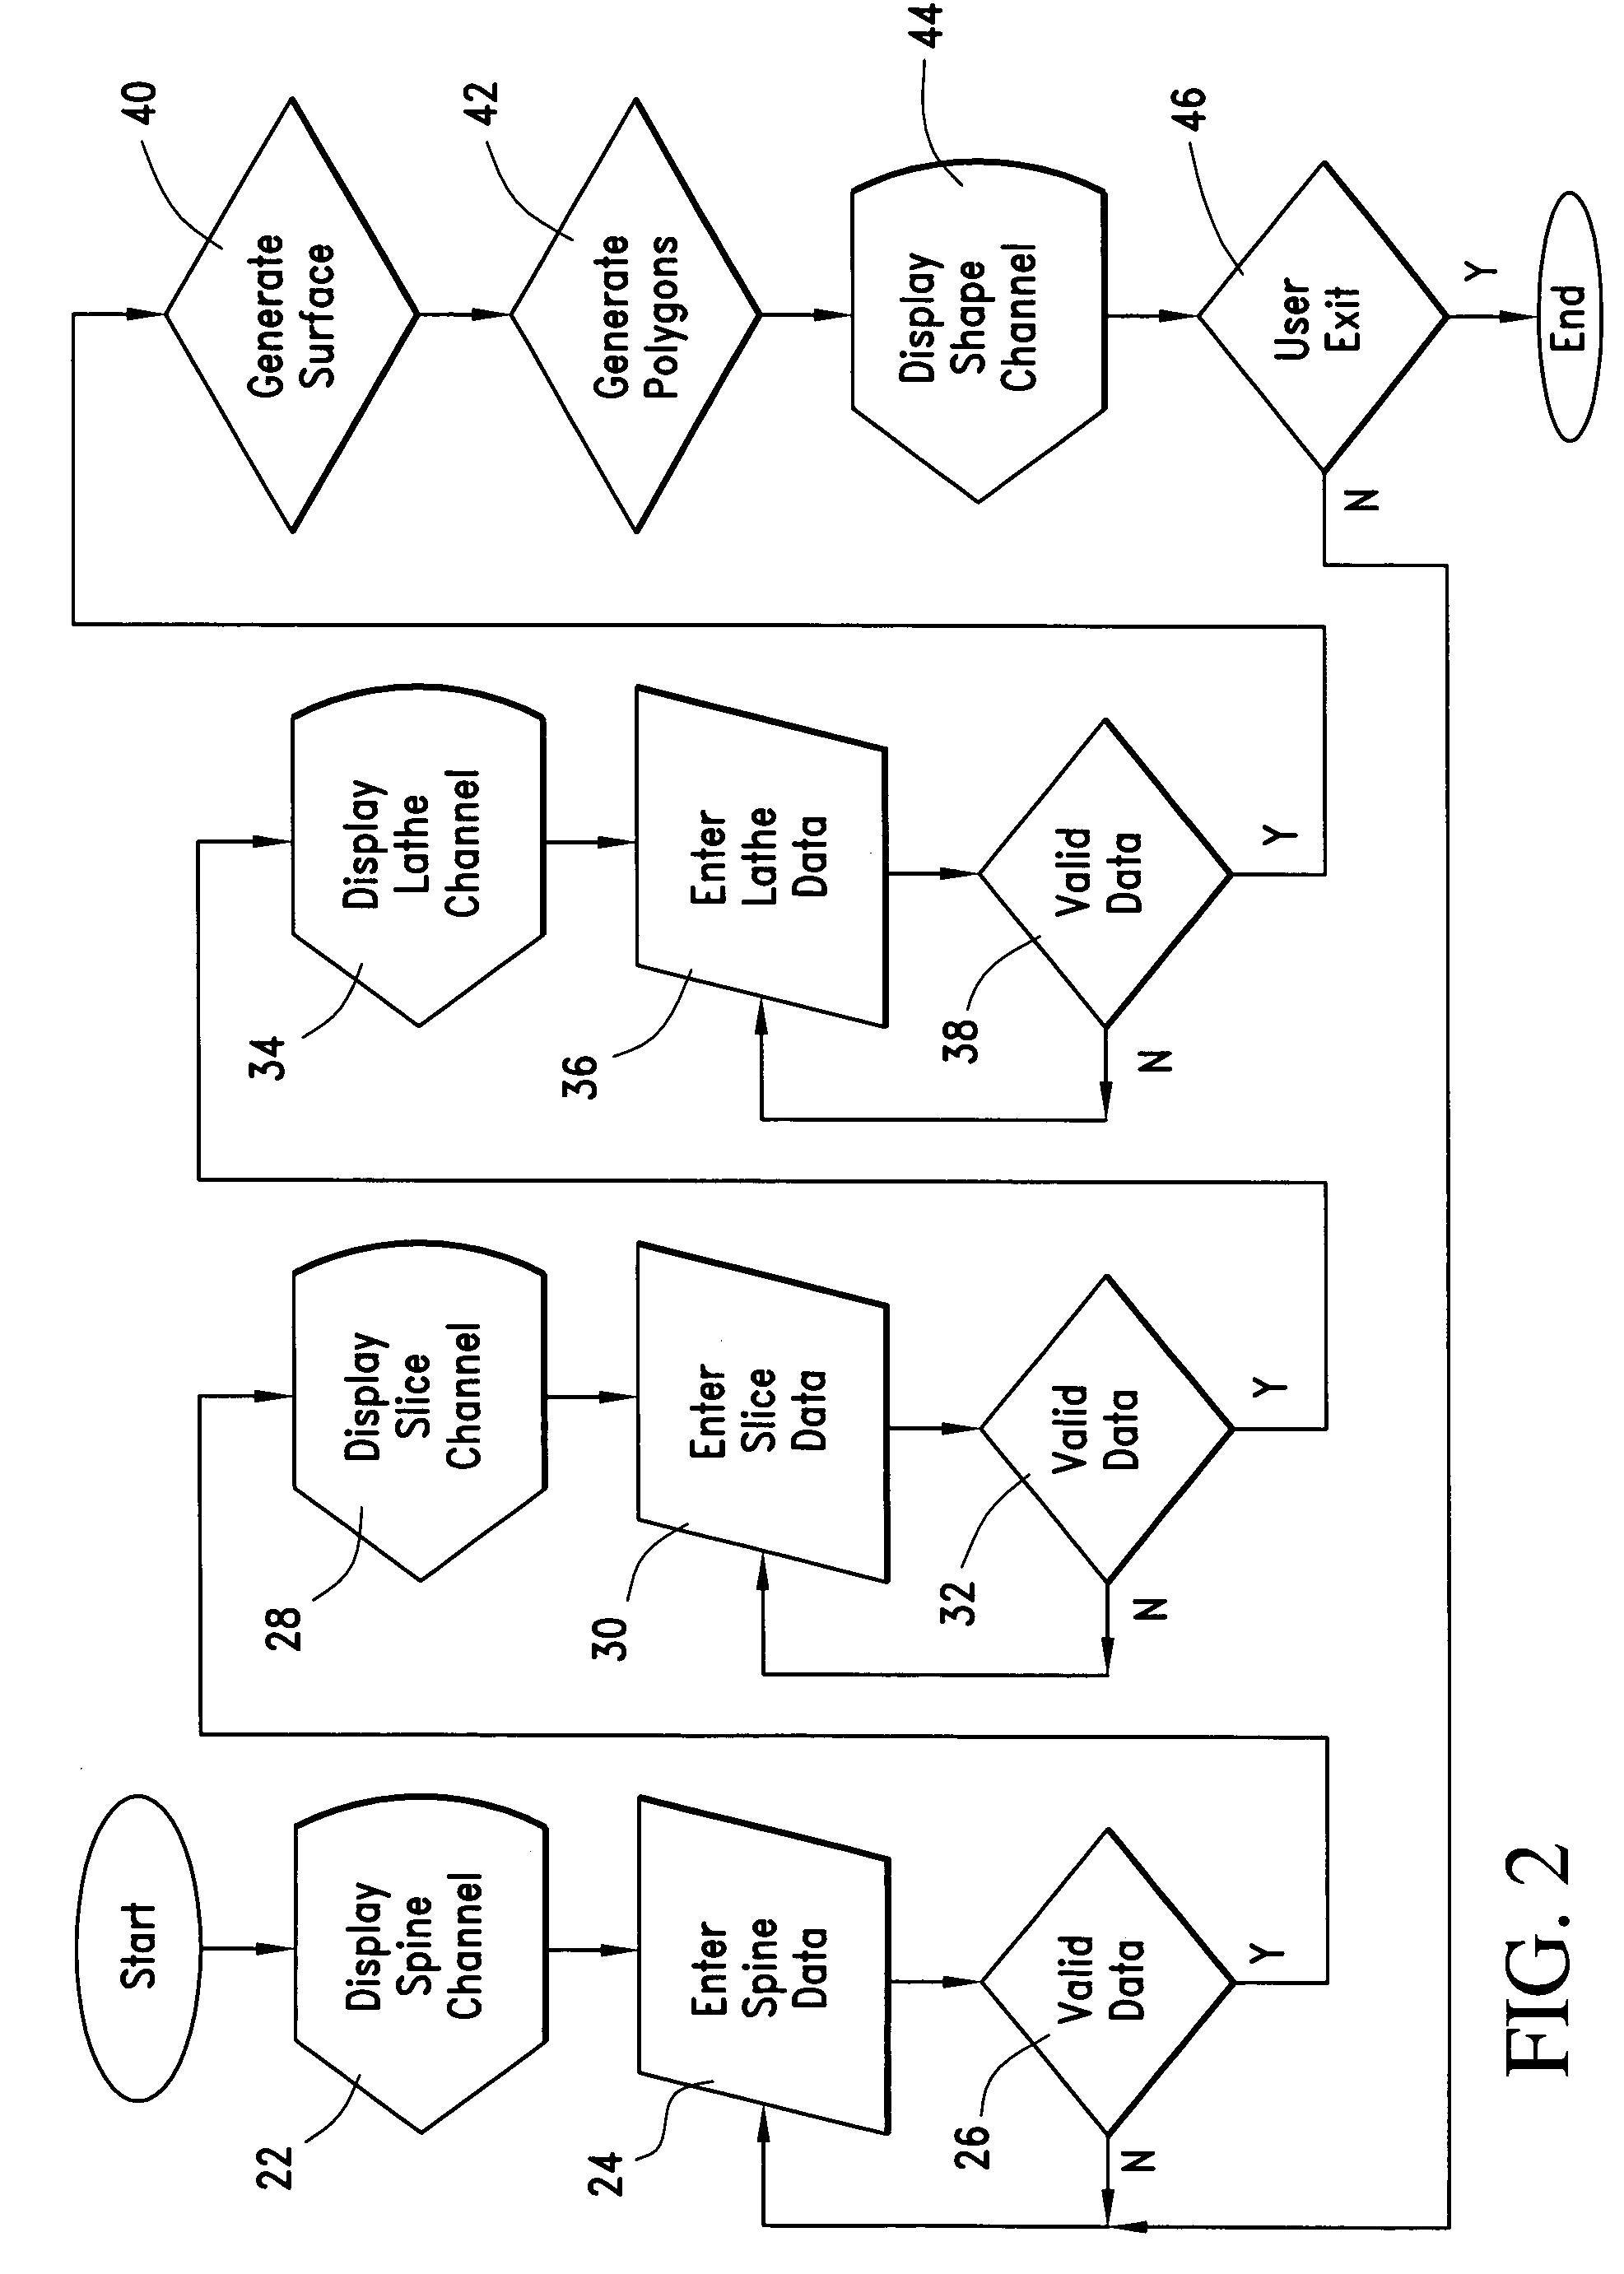 Apparatus and method for generating 3D images